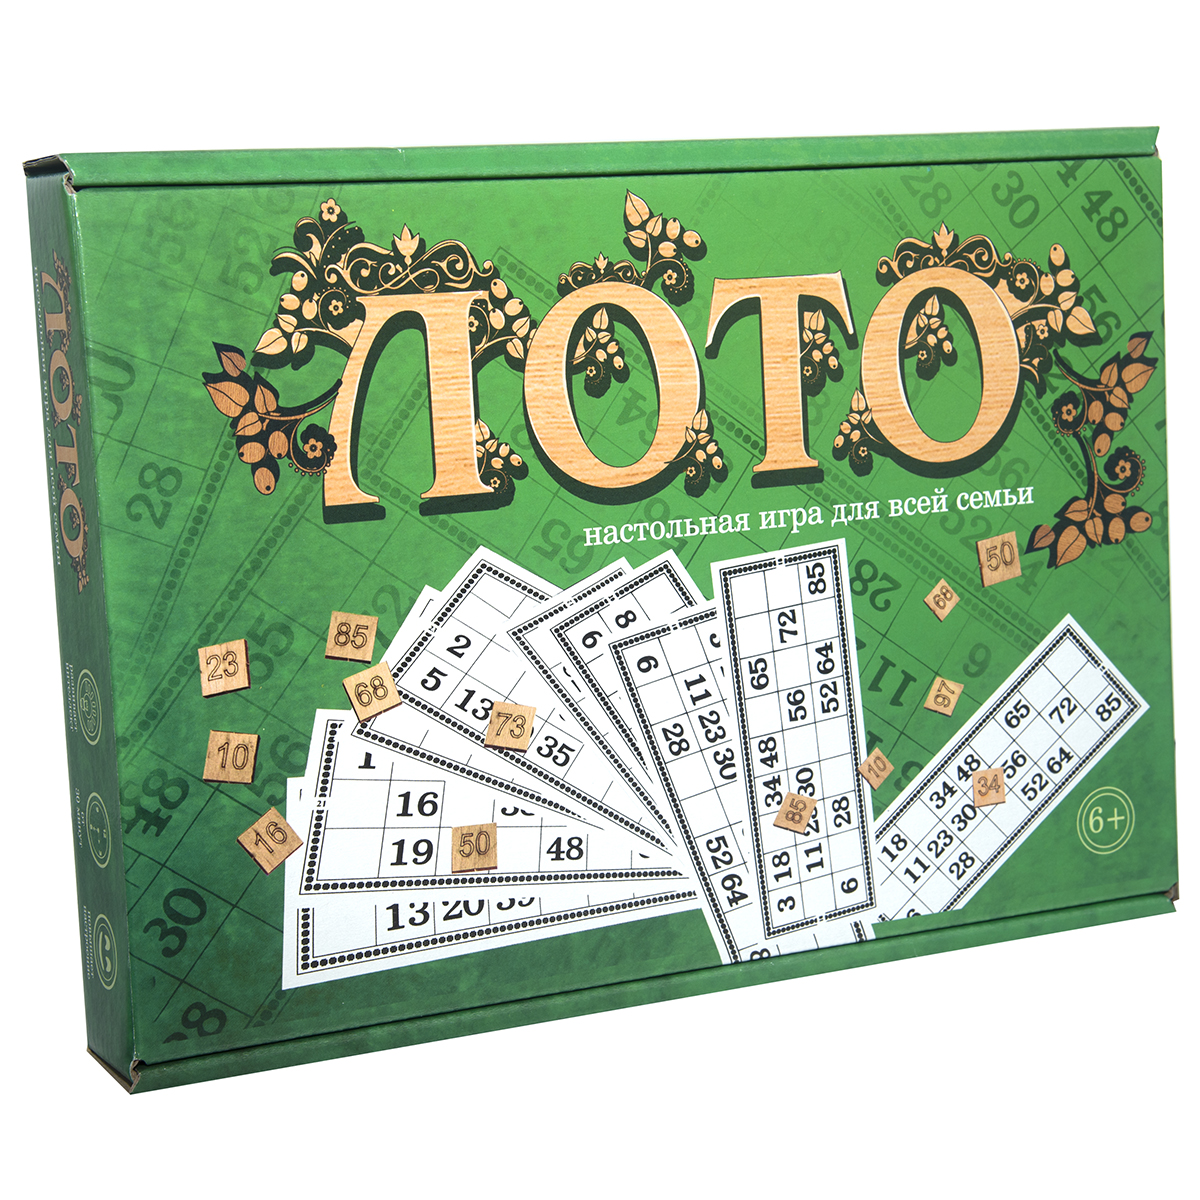 Lotto with wooden chips (Russian) (30661)